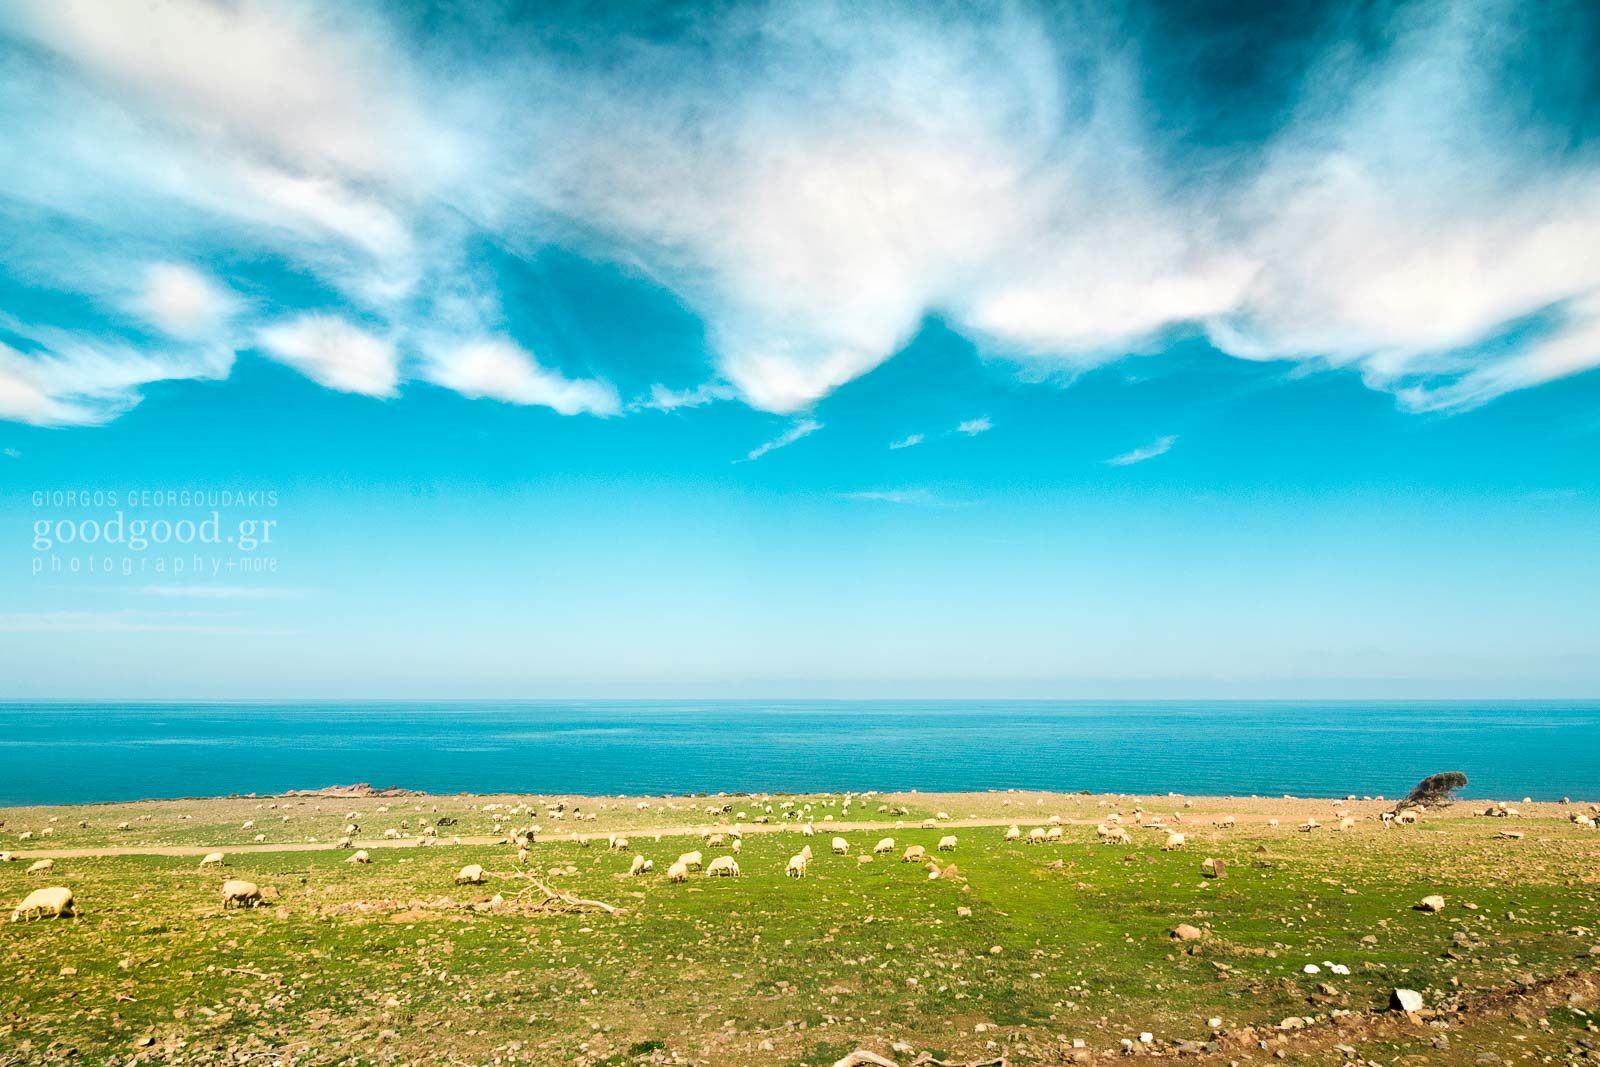 Photograph of sheep grazing by the sea under the cloudy sky